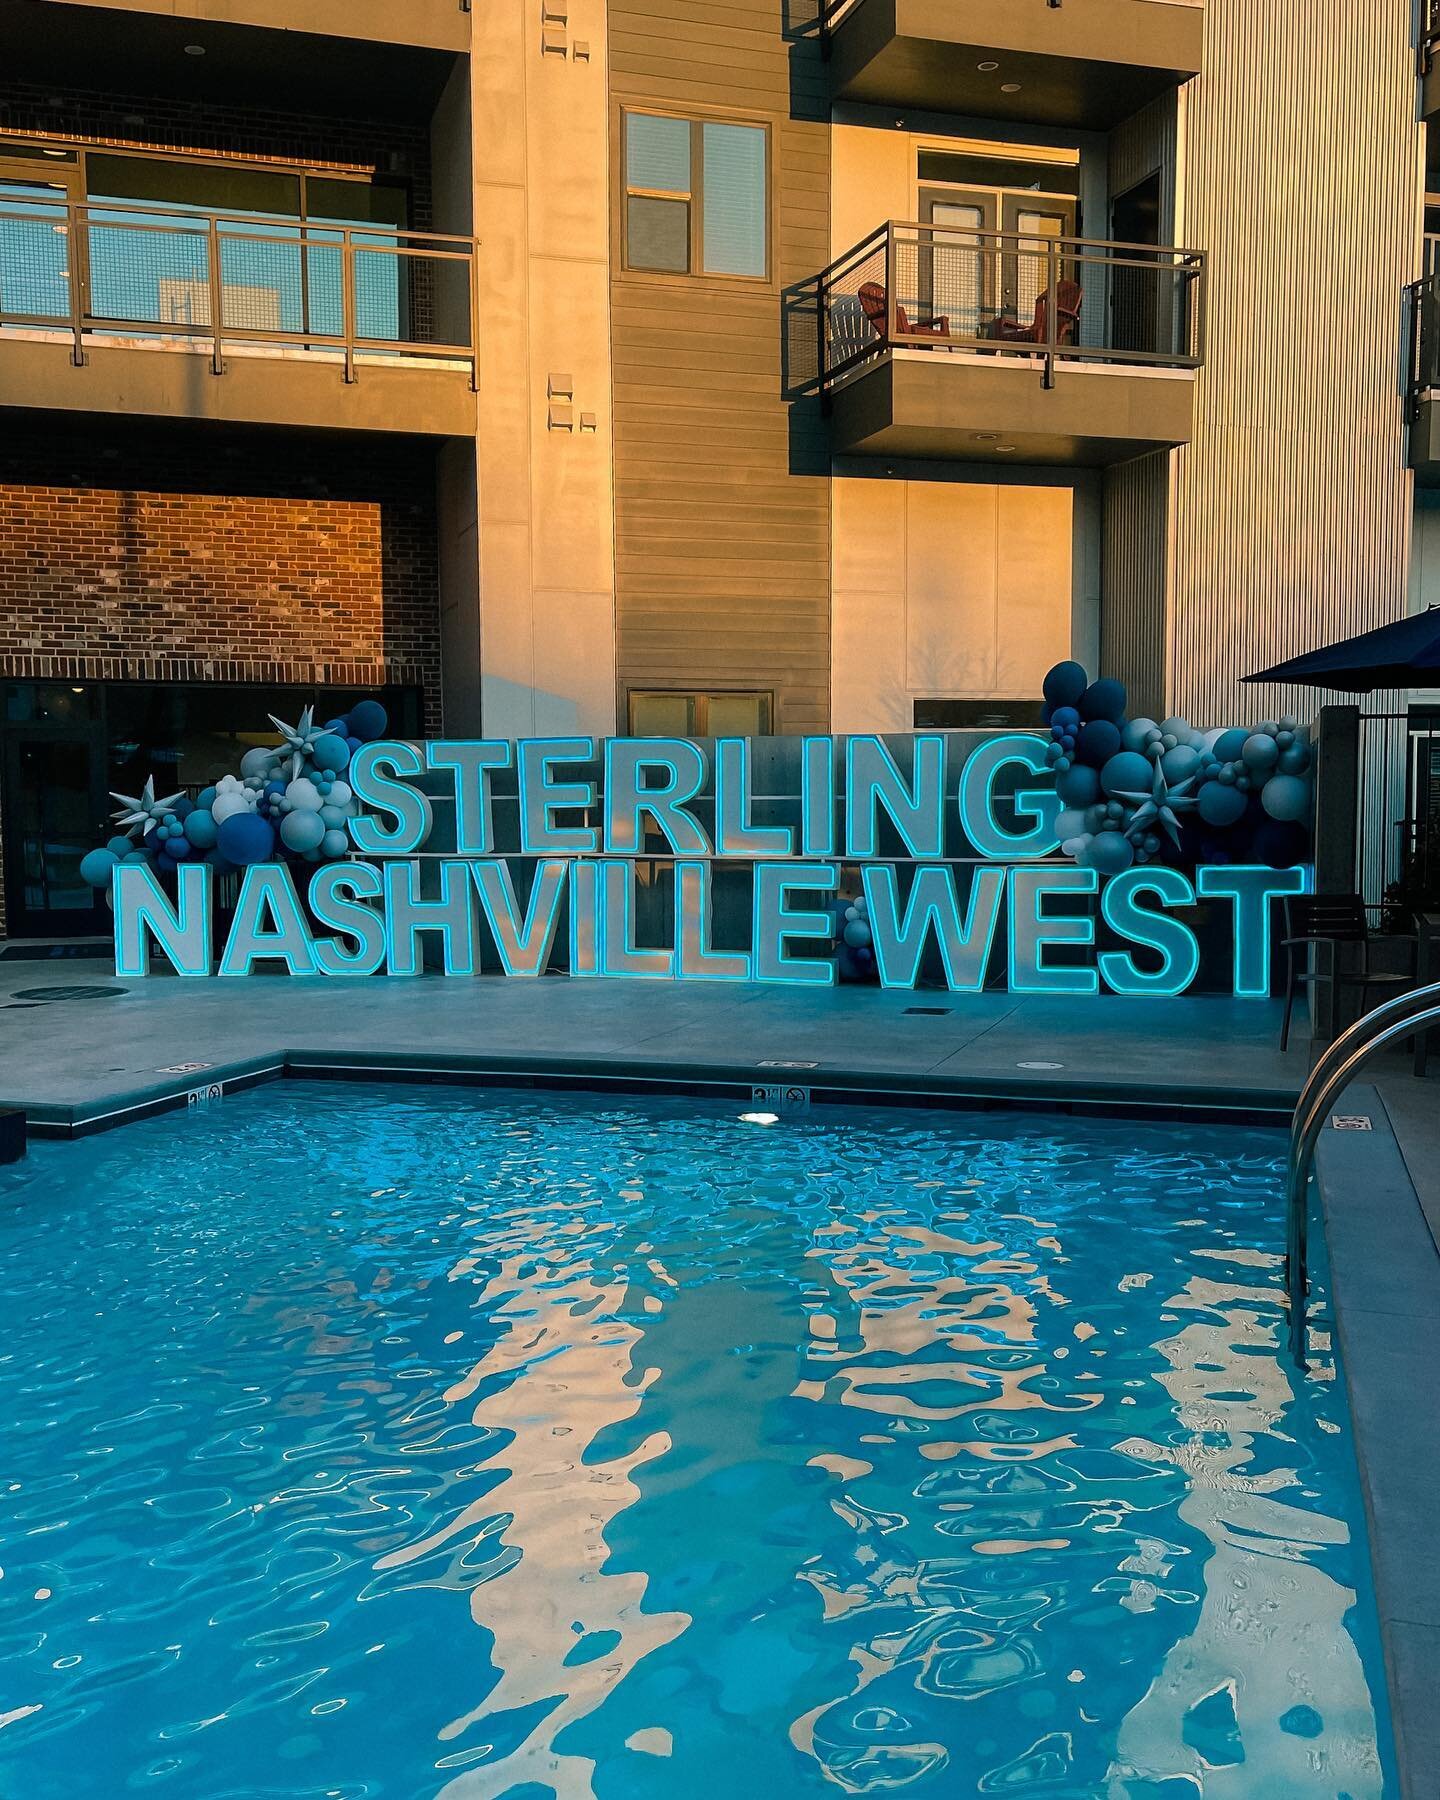 💛🩵Poolside Golden Hour🩵💛 @sterlingnashvillewest &lsquo;s backdrop was a show stopper for their ribbon cutting today!!
.
Balloons by @franklin_celebrations 
.
#SterlingNashvilleWest
#LedMarquee #LedMarqueeNashville
.
#MarqueeLetters #NashvilleEven